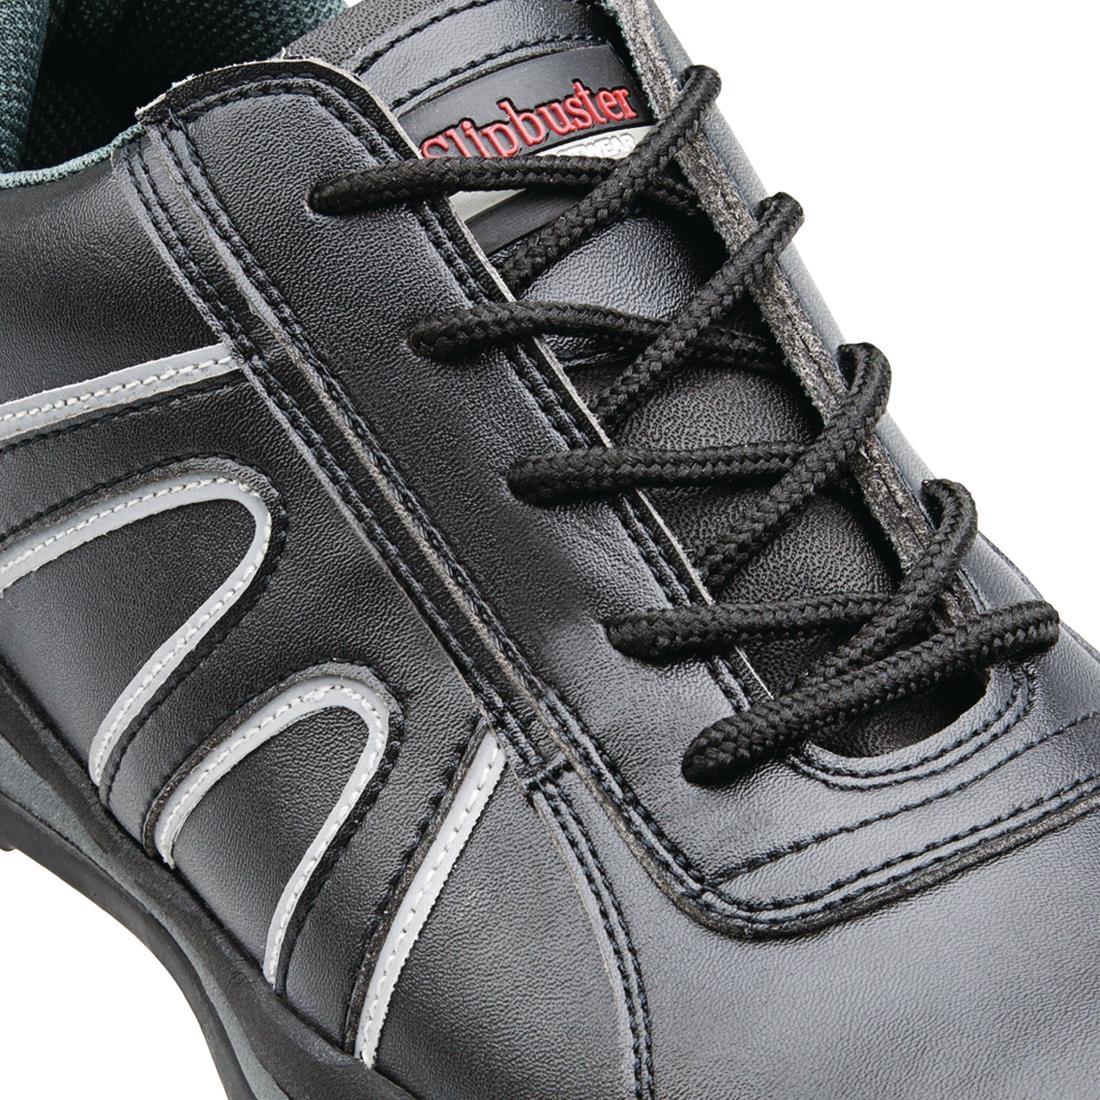 Slipbuster Safety Trainers Black 37 - A708-37  - 3